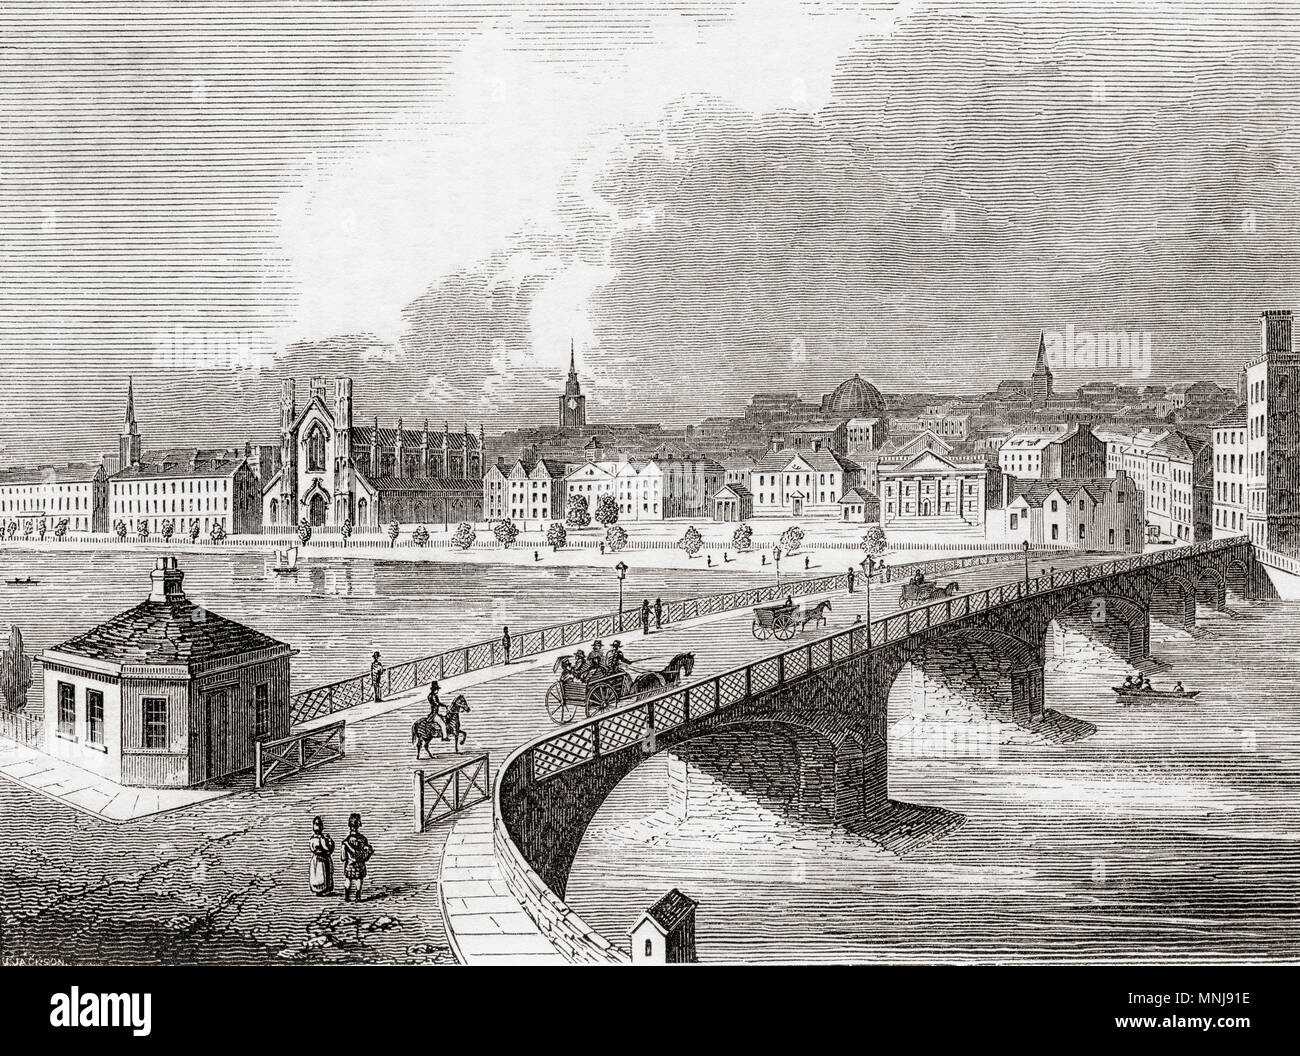 Glasgow Bridge, aka Bishop Rae's Bridge, Great Bridge, Old Bridge and Stockwell Street Bridge, Glasgow, Scotland, seen here in the early 19th century.  From Old England: A Pictorial Museum, published 1847. Stock Photo